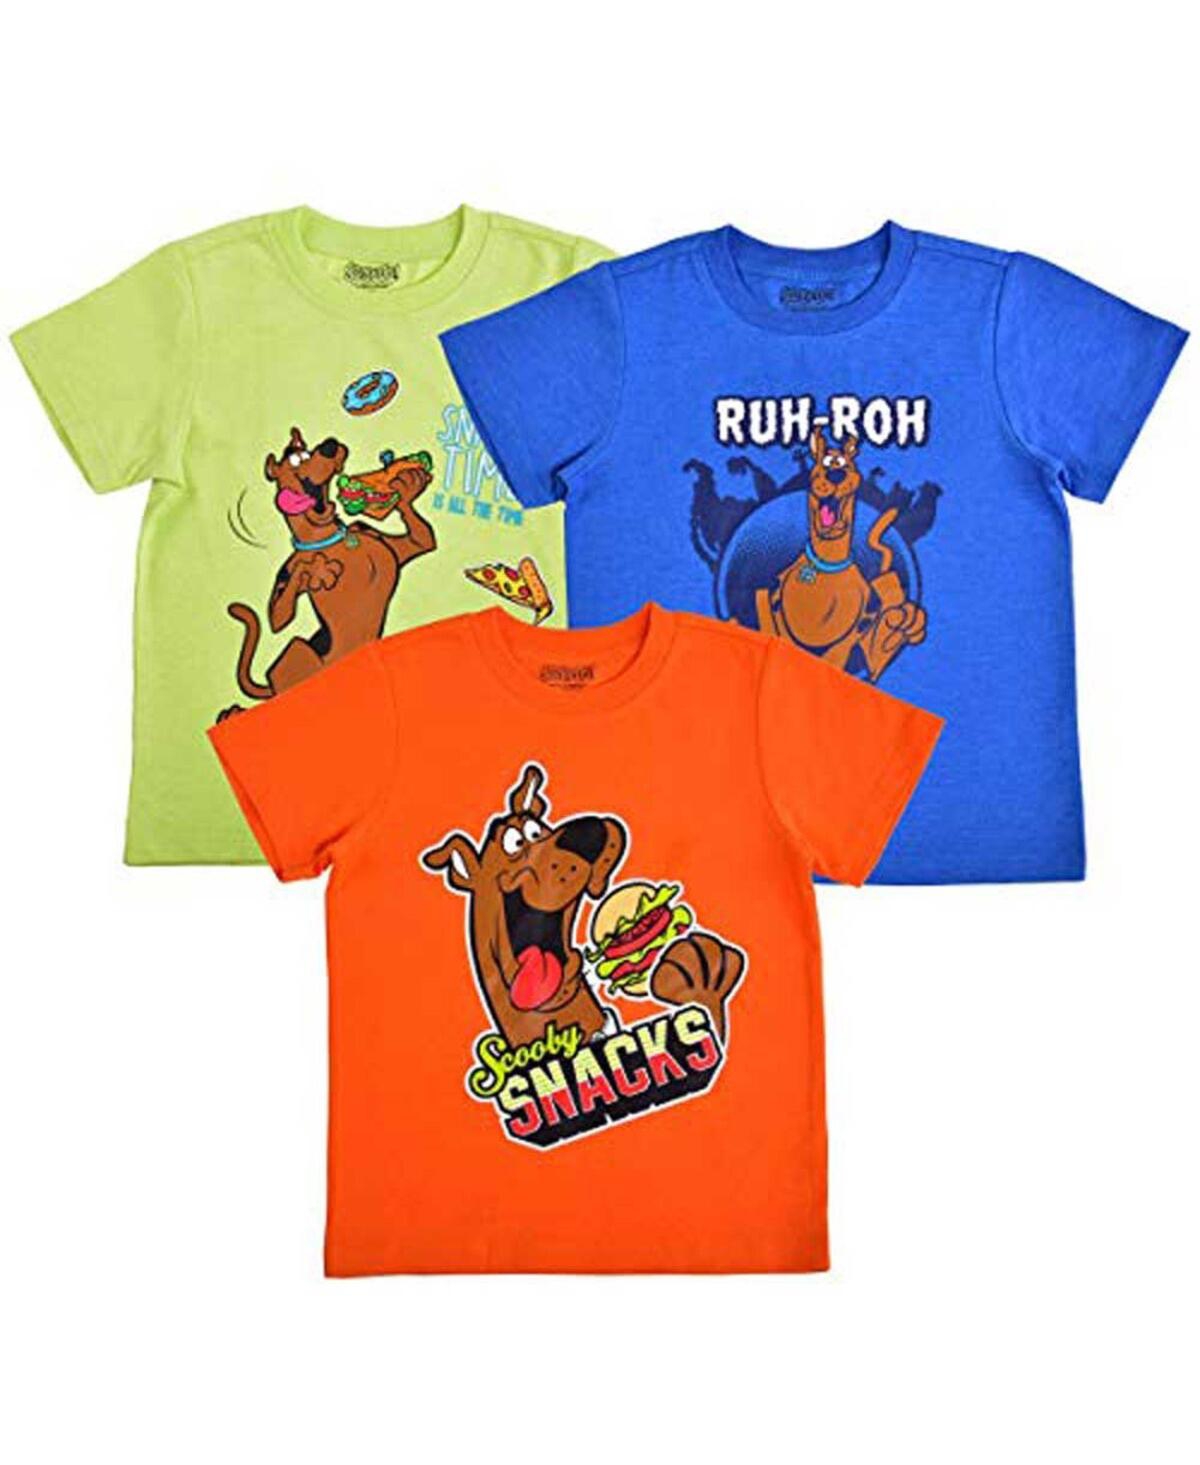 Shop Children's Apparel Network Toddler Boys And Girls Orange, Blue, Yellow Scooby-doo T-shirt Three-pack In Orange,blue